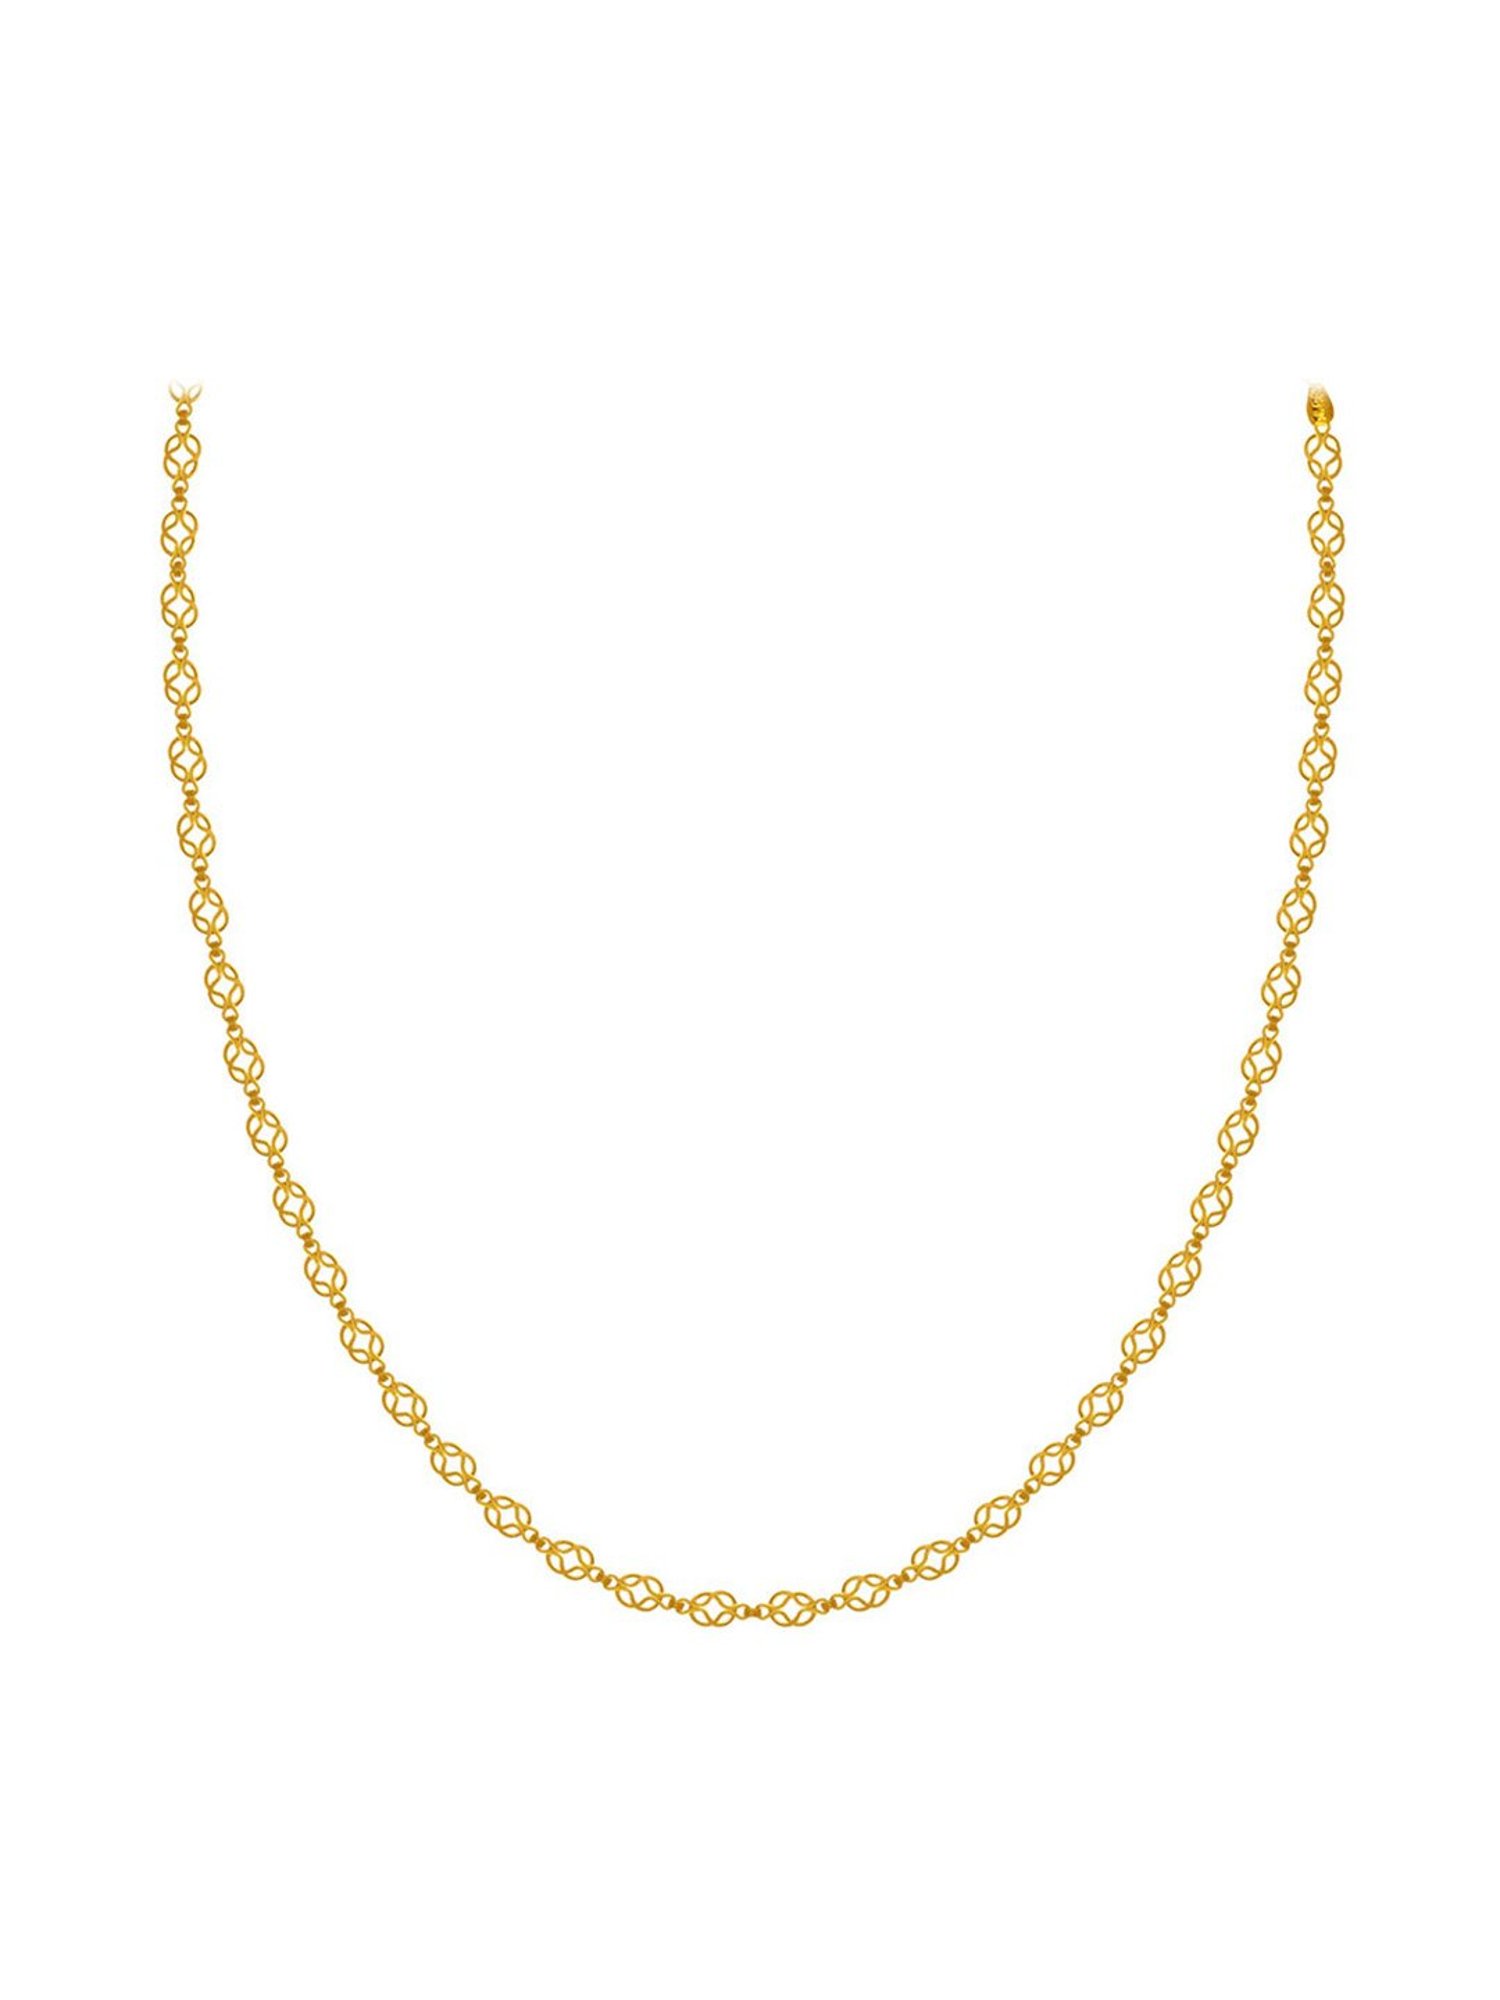 Gold Chain PNG Images With Transparent Background | Free Download On Lovepik